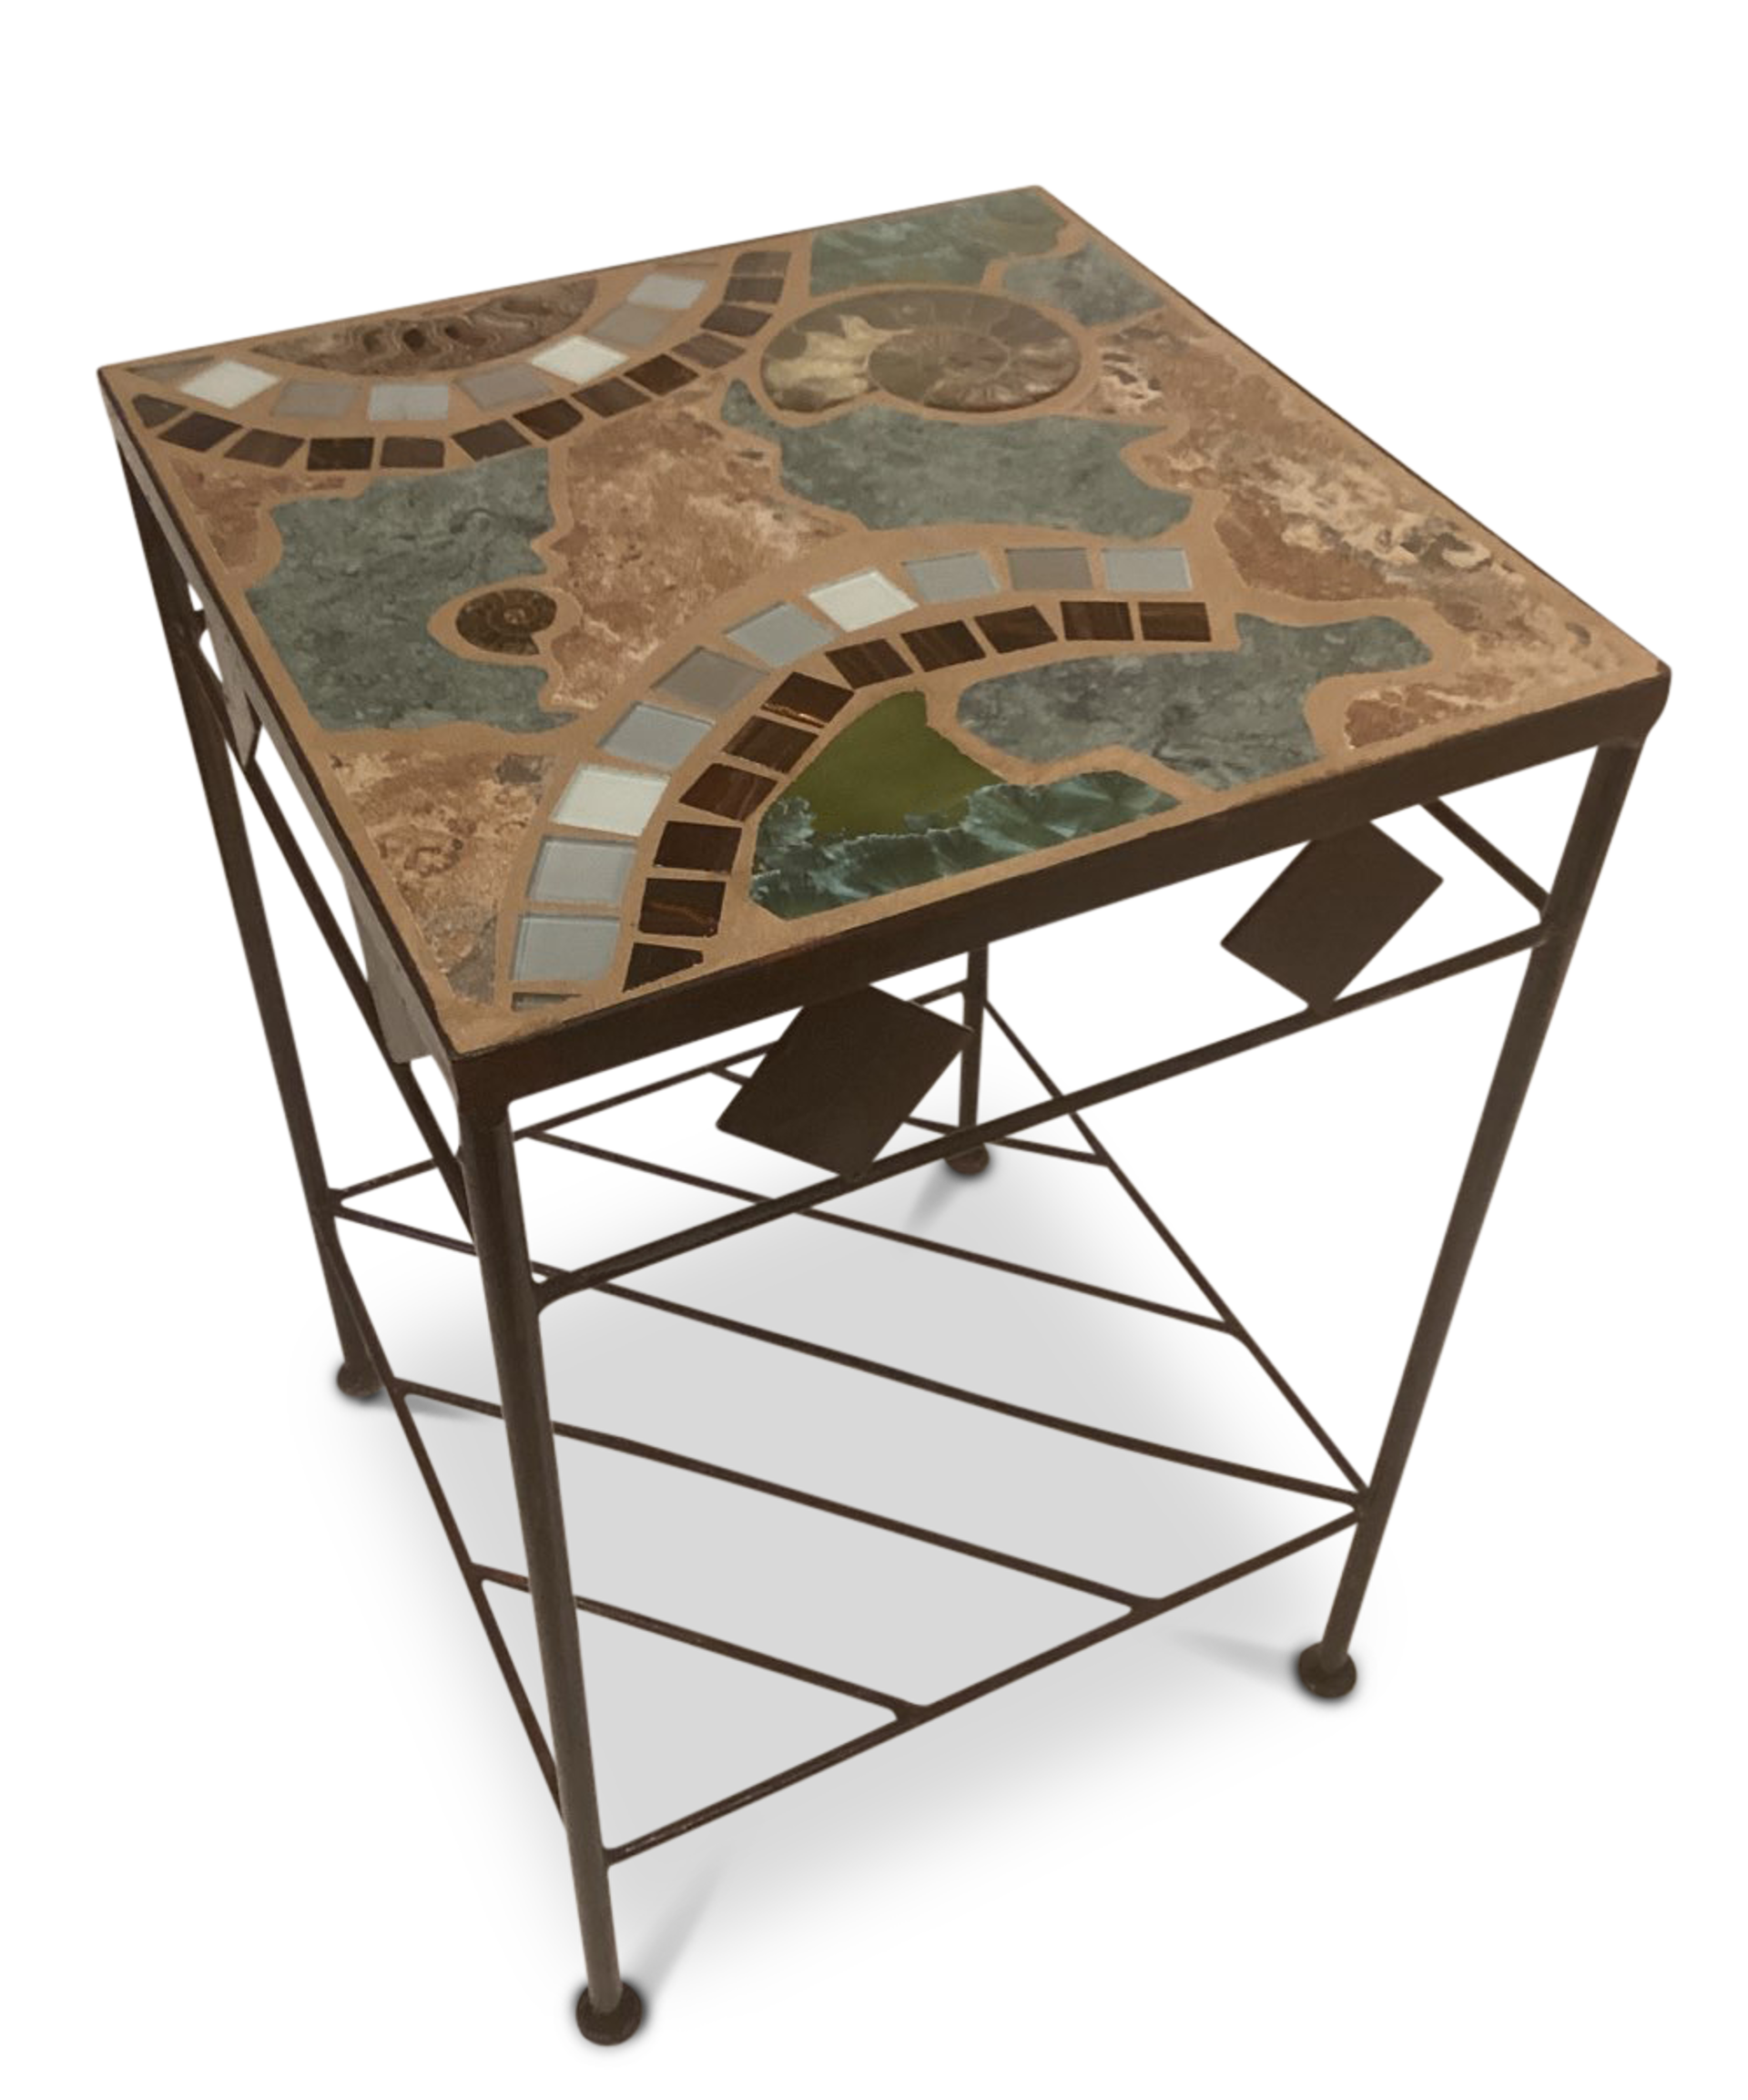 Square Accent Table by Clay Hands Furniture